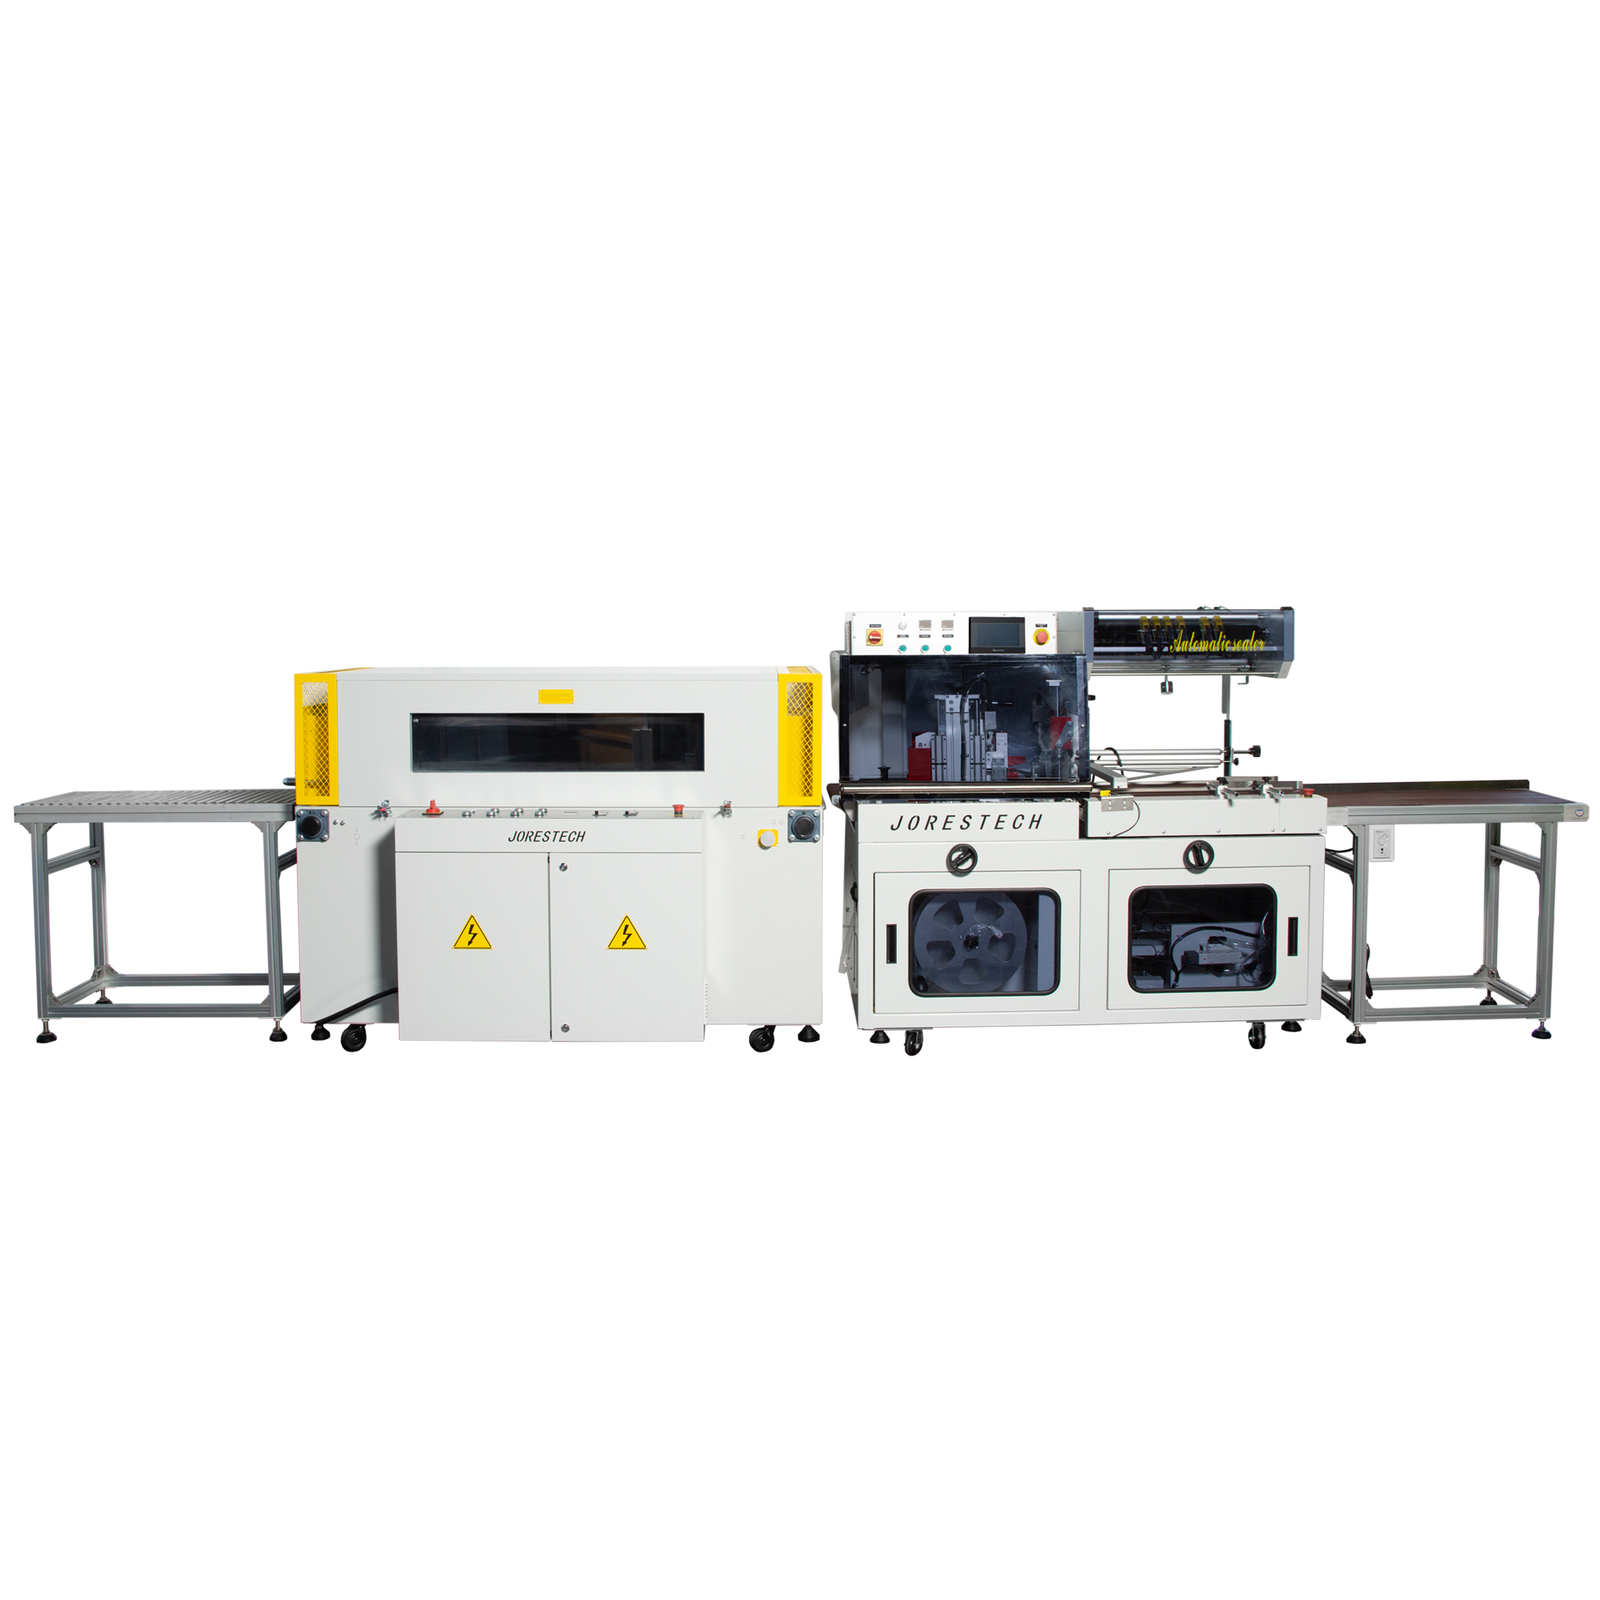 Complete automatic side sealing and shrink system including infeed conveyor, exit conveyor, side seal sealer, and shrink tunnel shown in a frontal view.